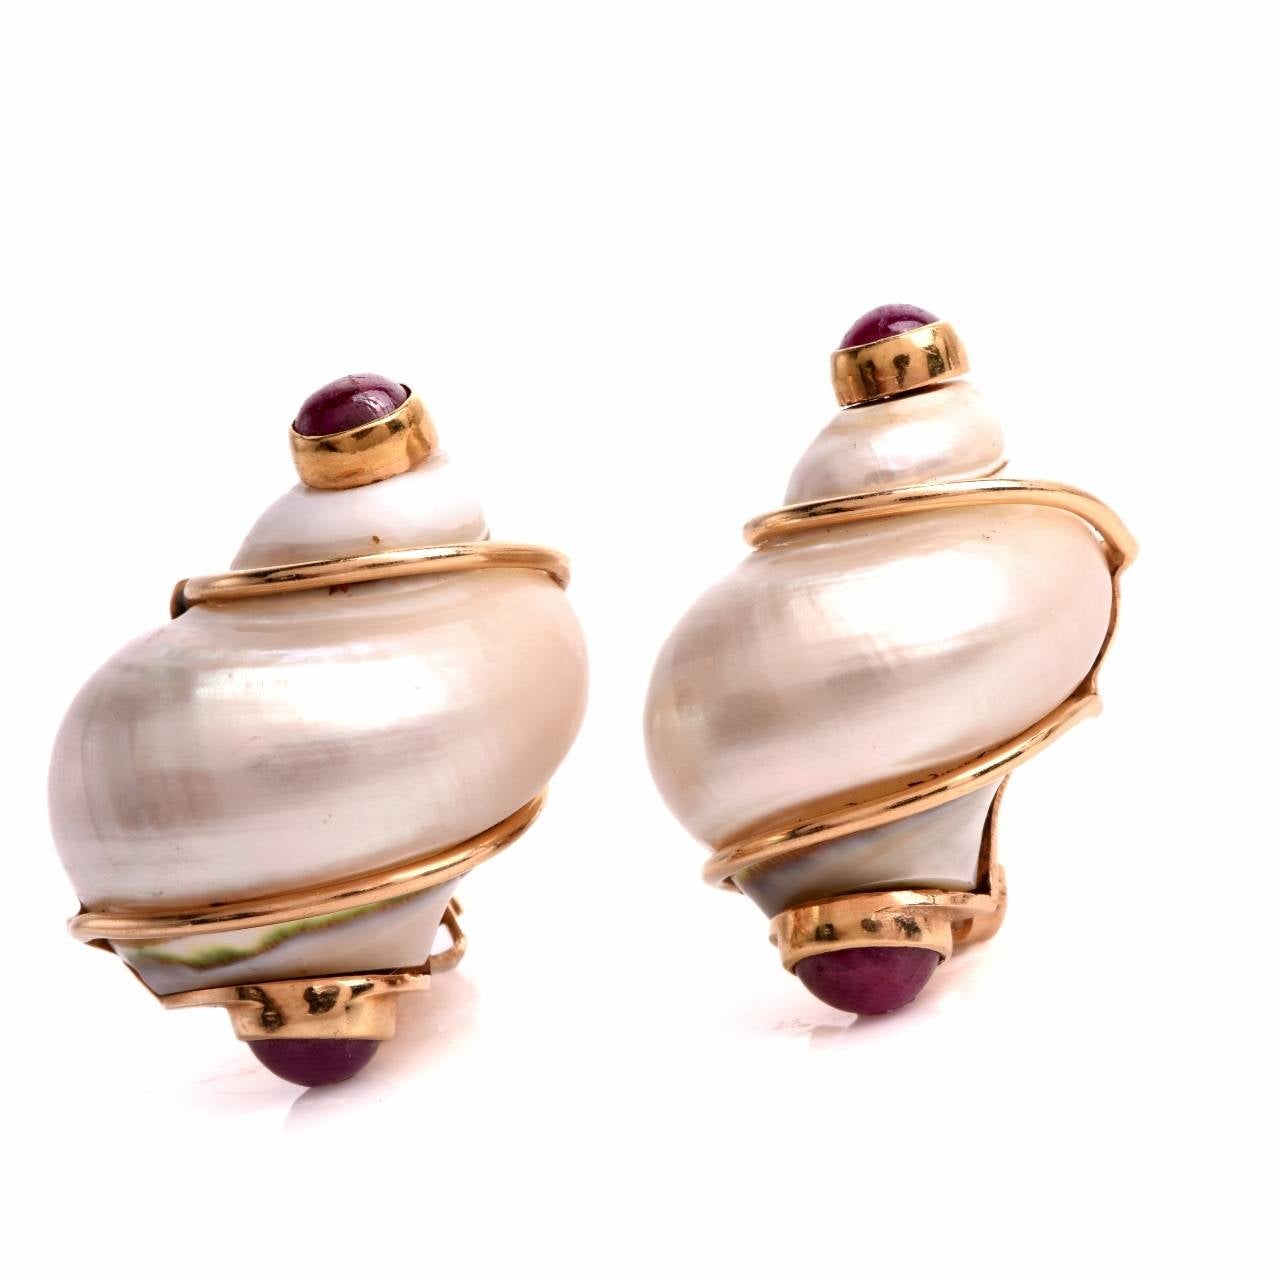 Item #: 6172113

These Seaman Schepps earrings are designed as a pair of (snail) shells, the enchanting spirals rendered in mother of pearl,  with a total number of 4 ruby cabochons, mounted within 14K yellow gold bezel settings. The reverse is